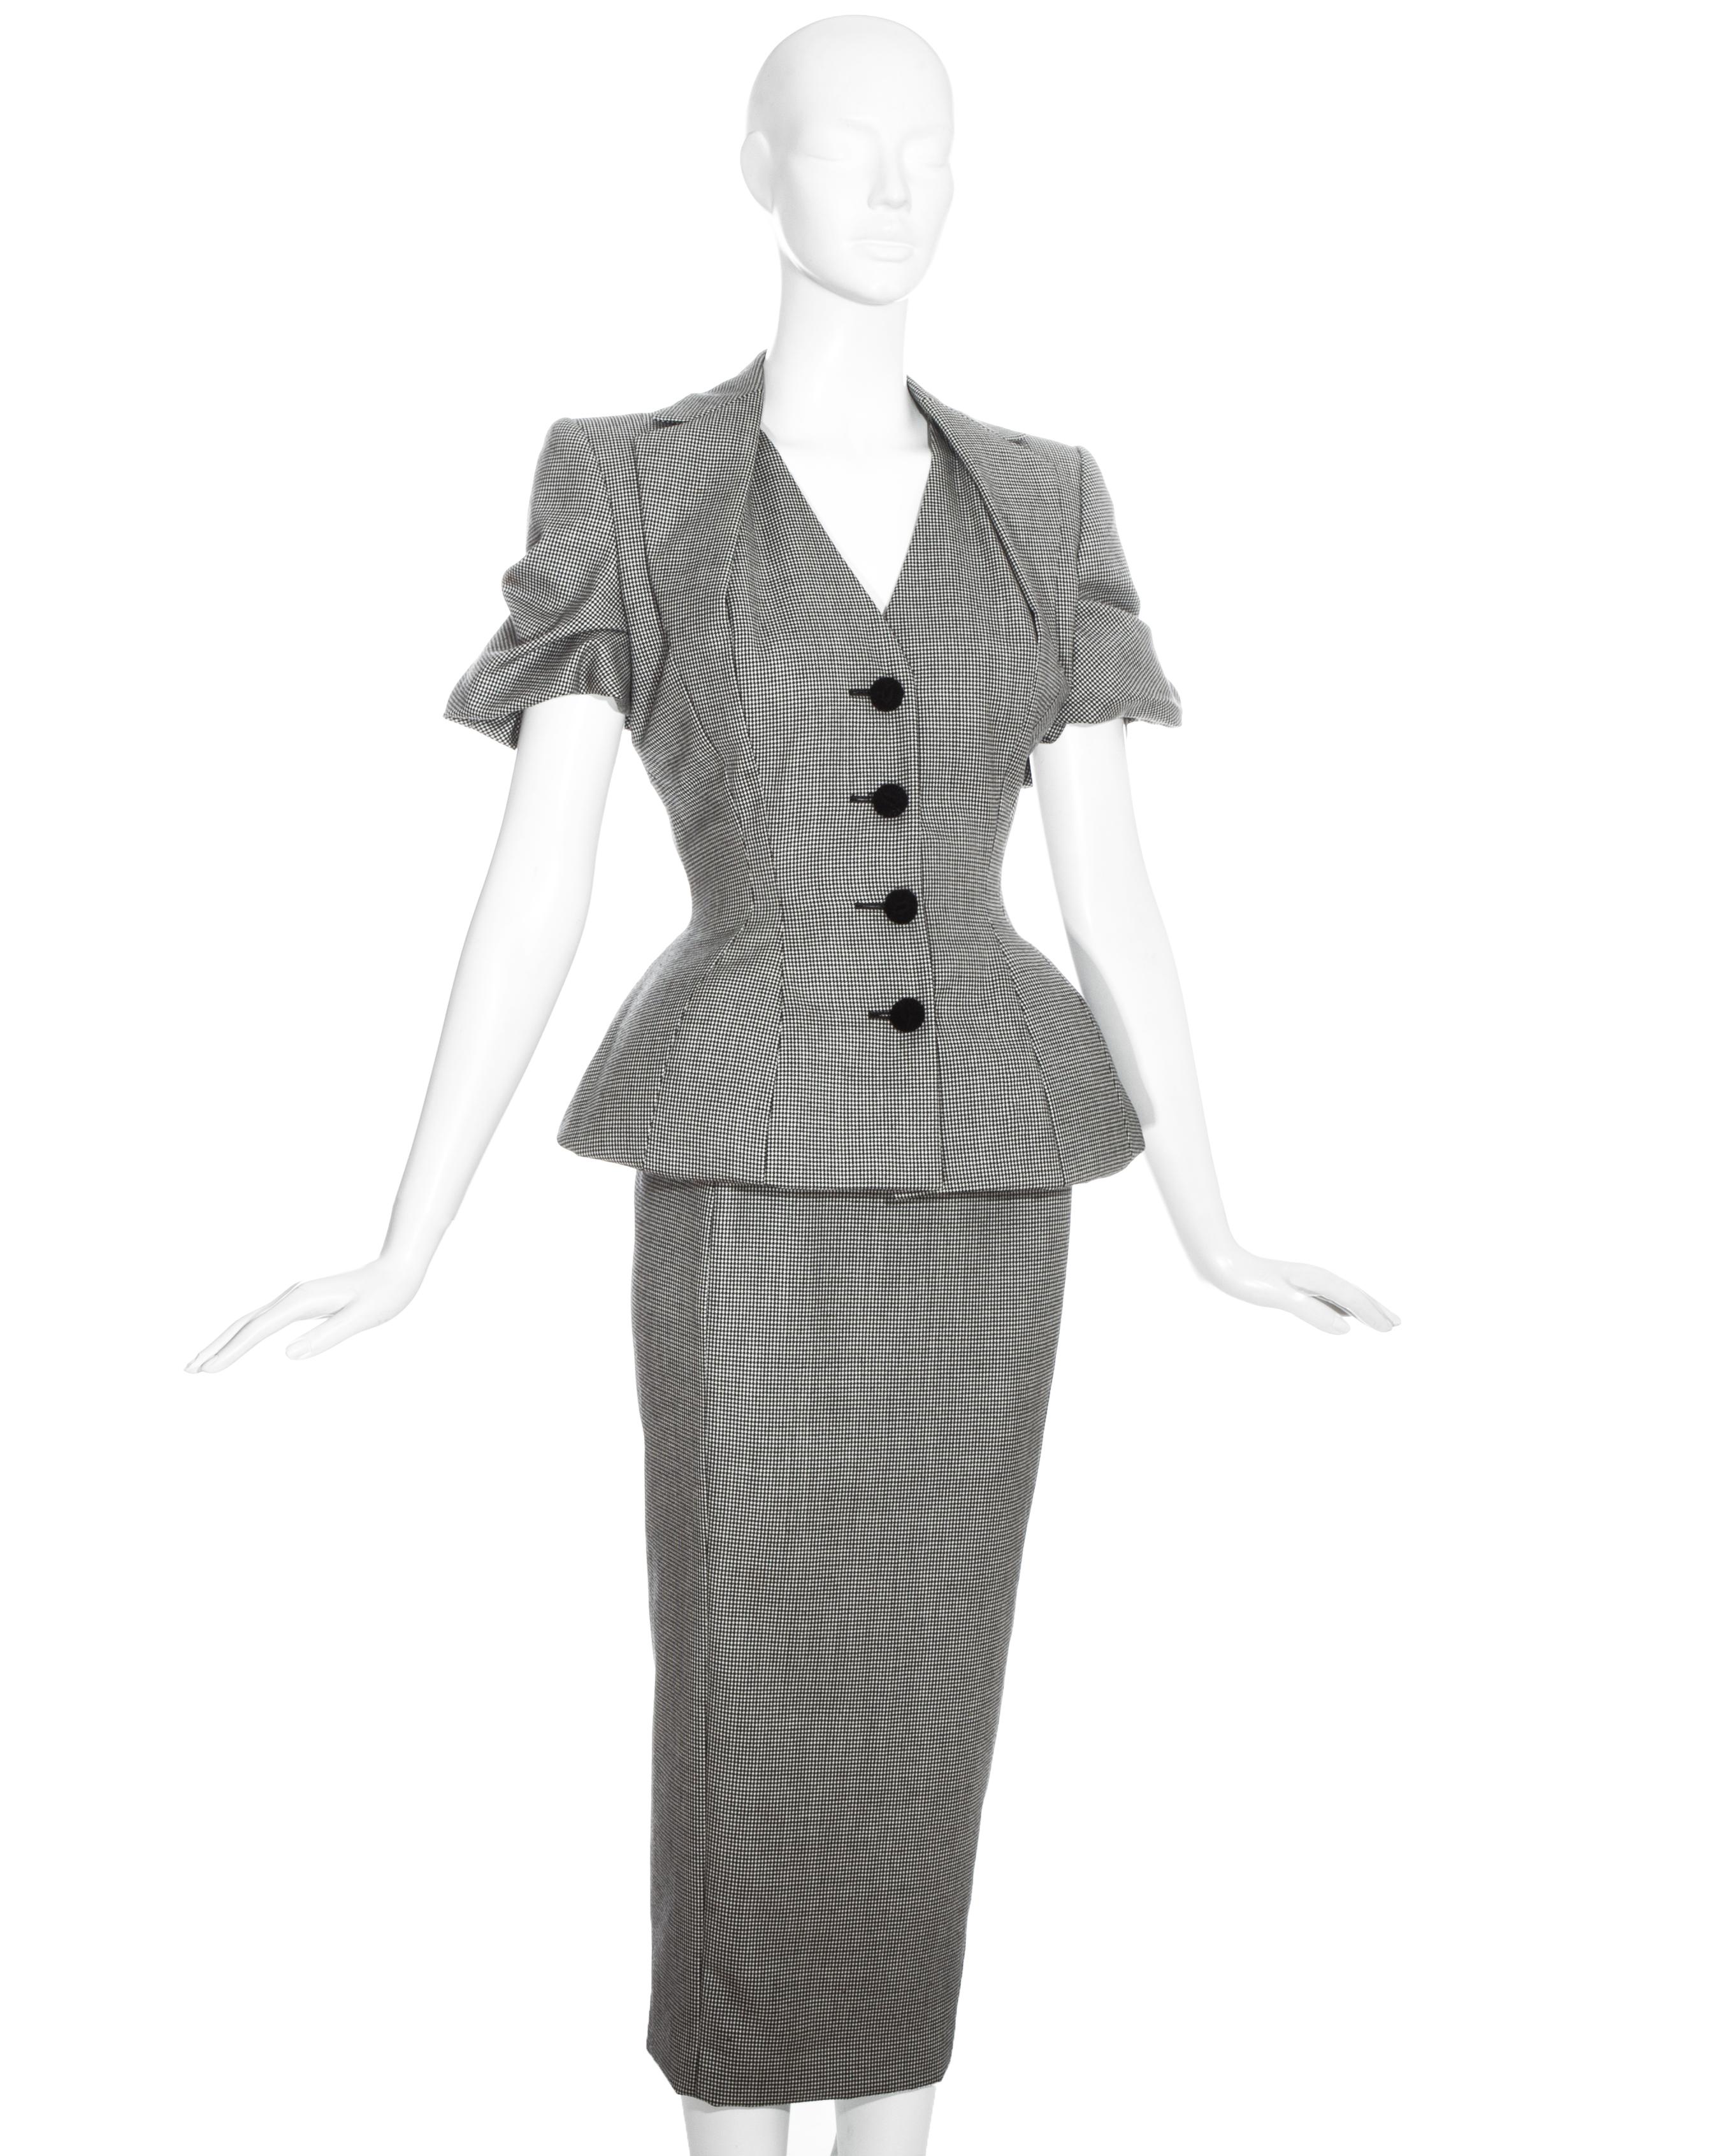 Gray John Galliano hounds tooth check wool skirt suit, ss 1995